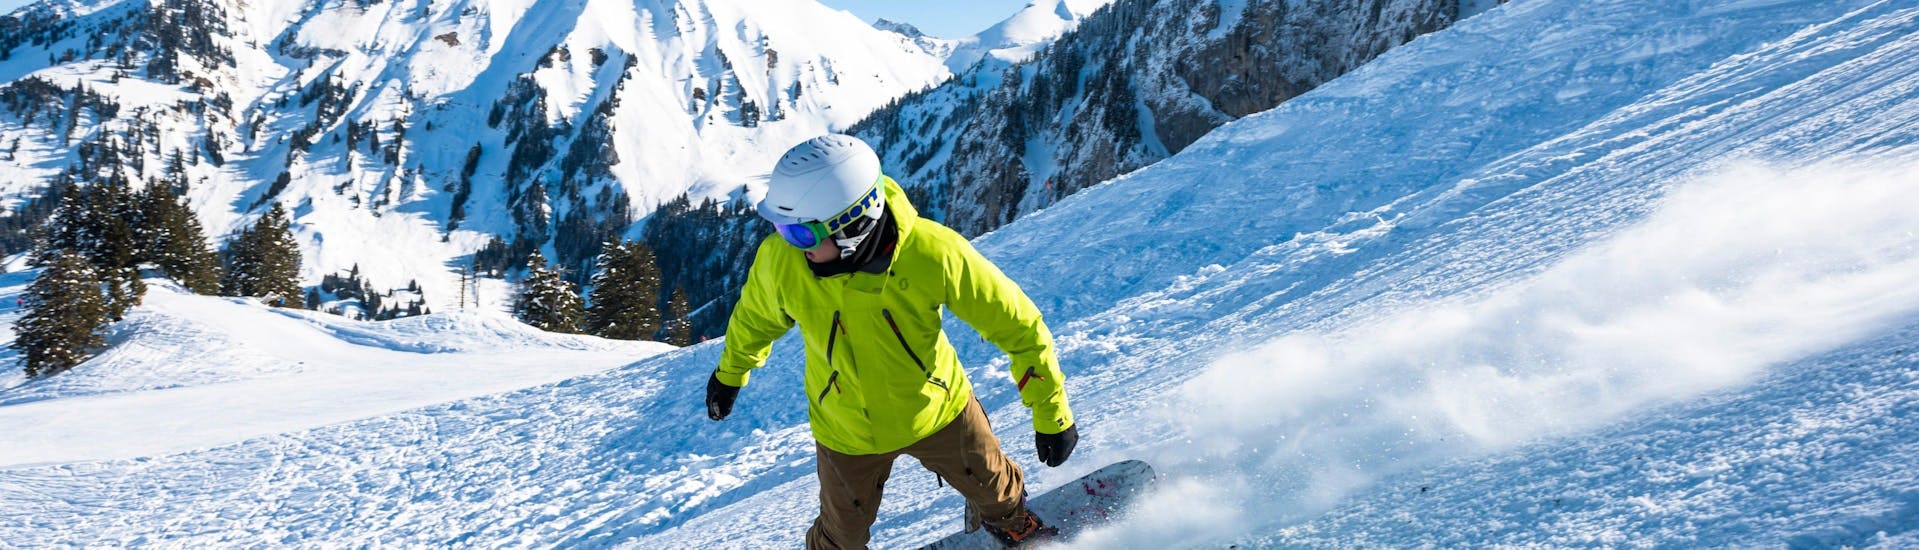 A snowboarder is going down a slope with confidence thanks to his Private Snowboarding Lessons - All Levels & Ages with the swiss ski school Charmey.